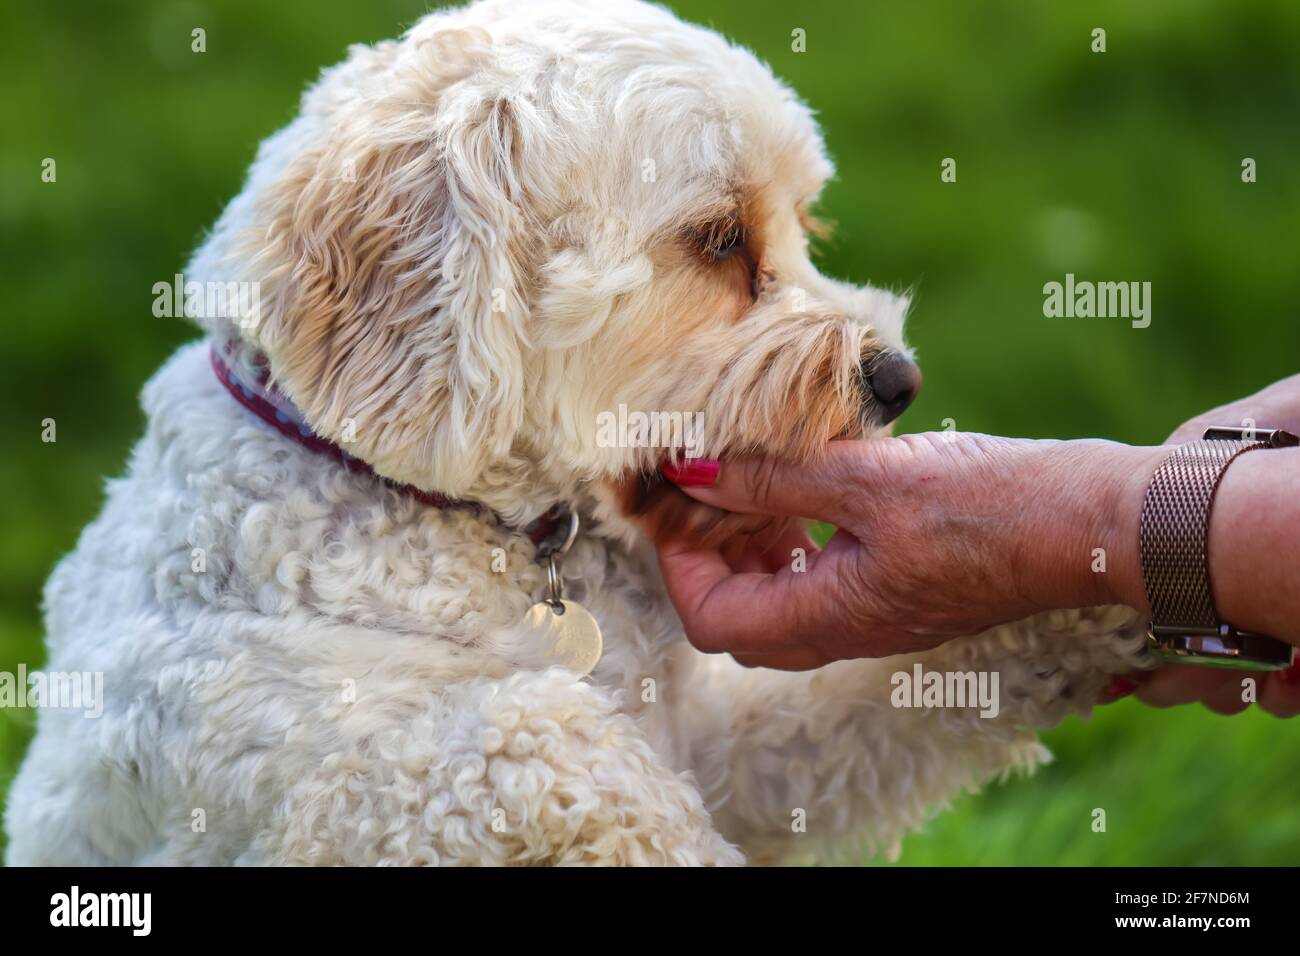 A Cockapoo dog looking being comforted by an older lady Stock Photo